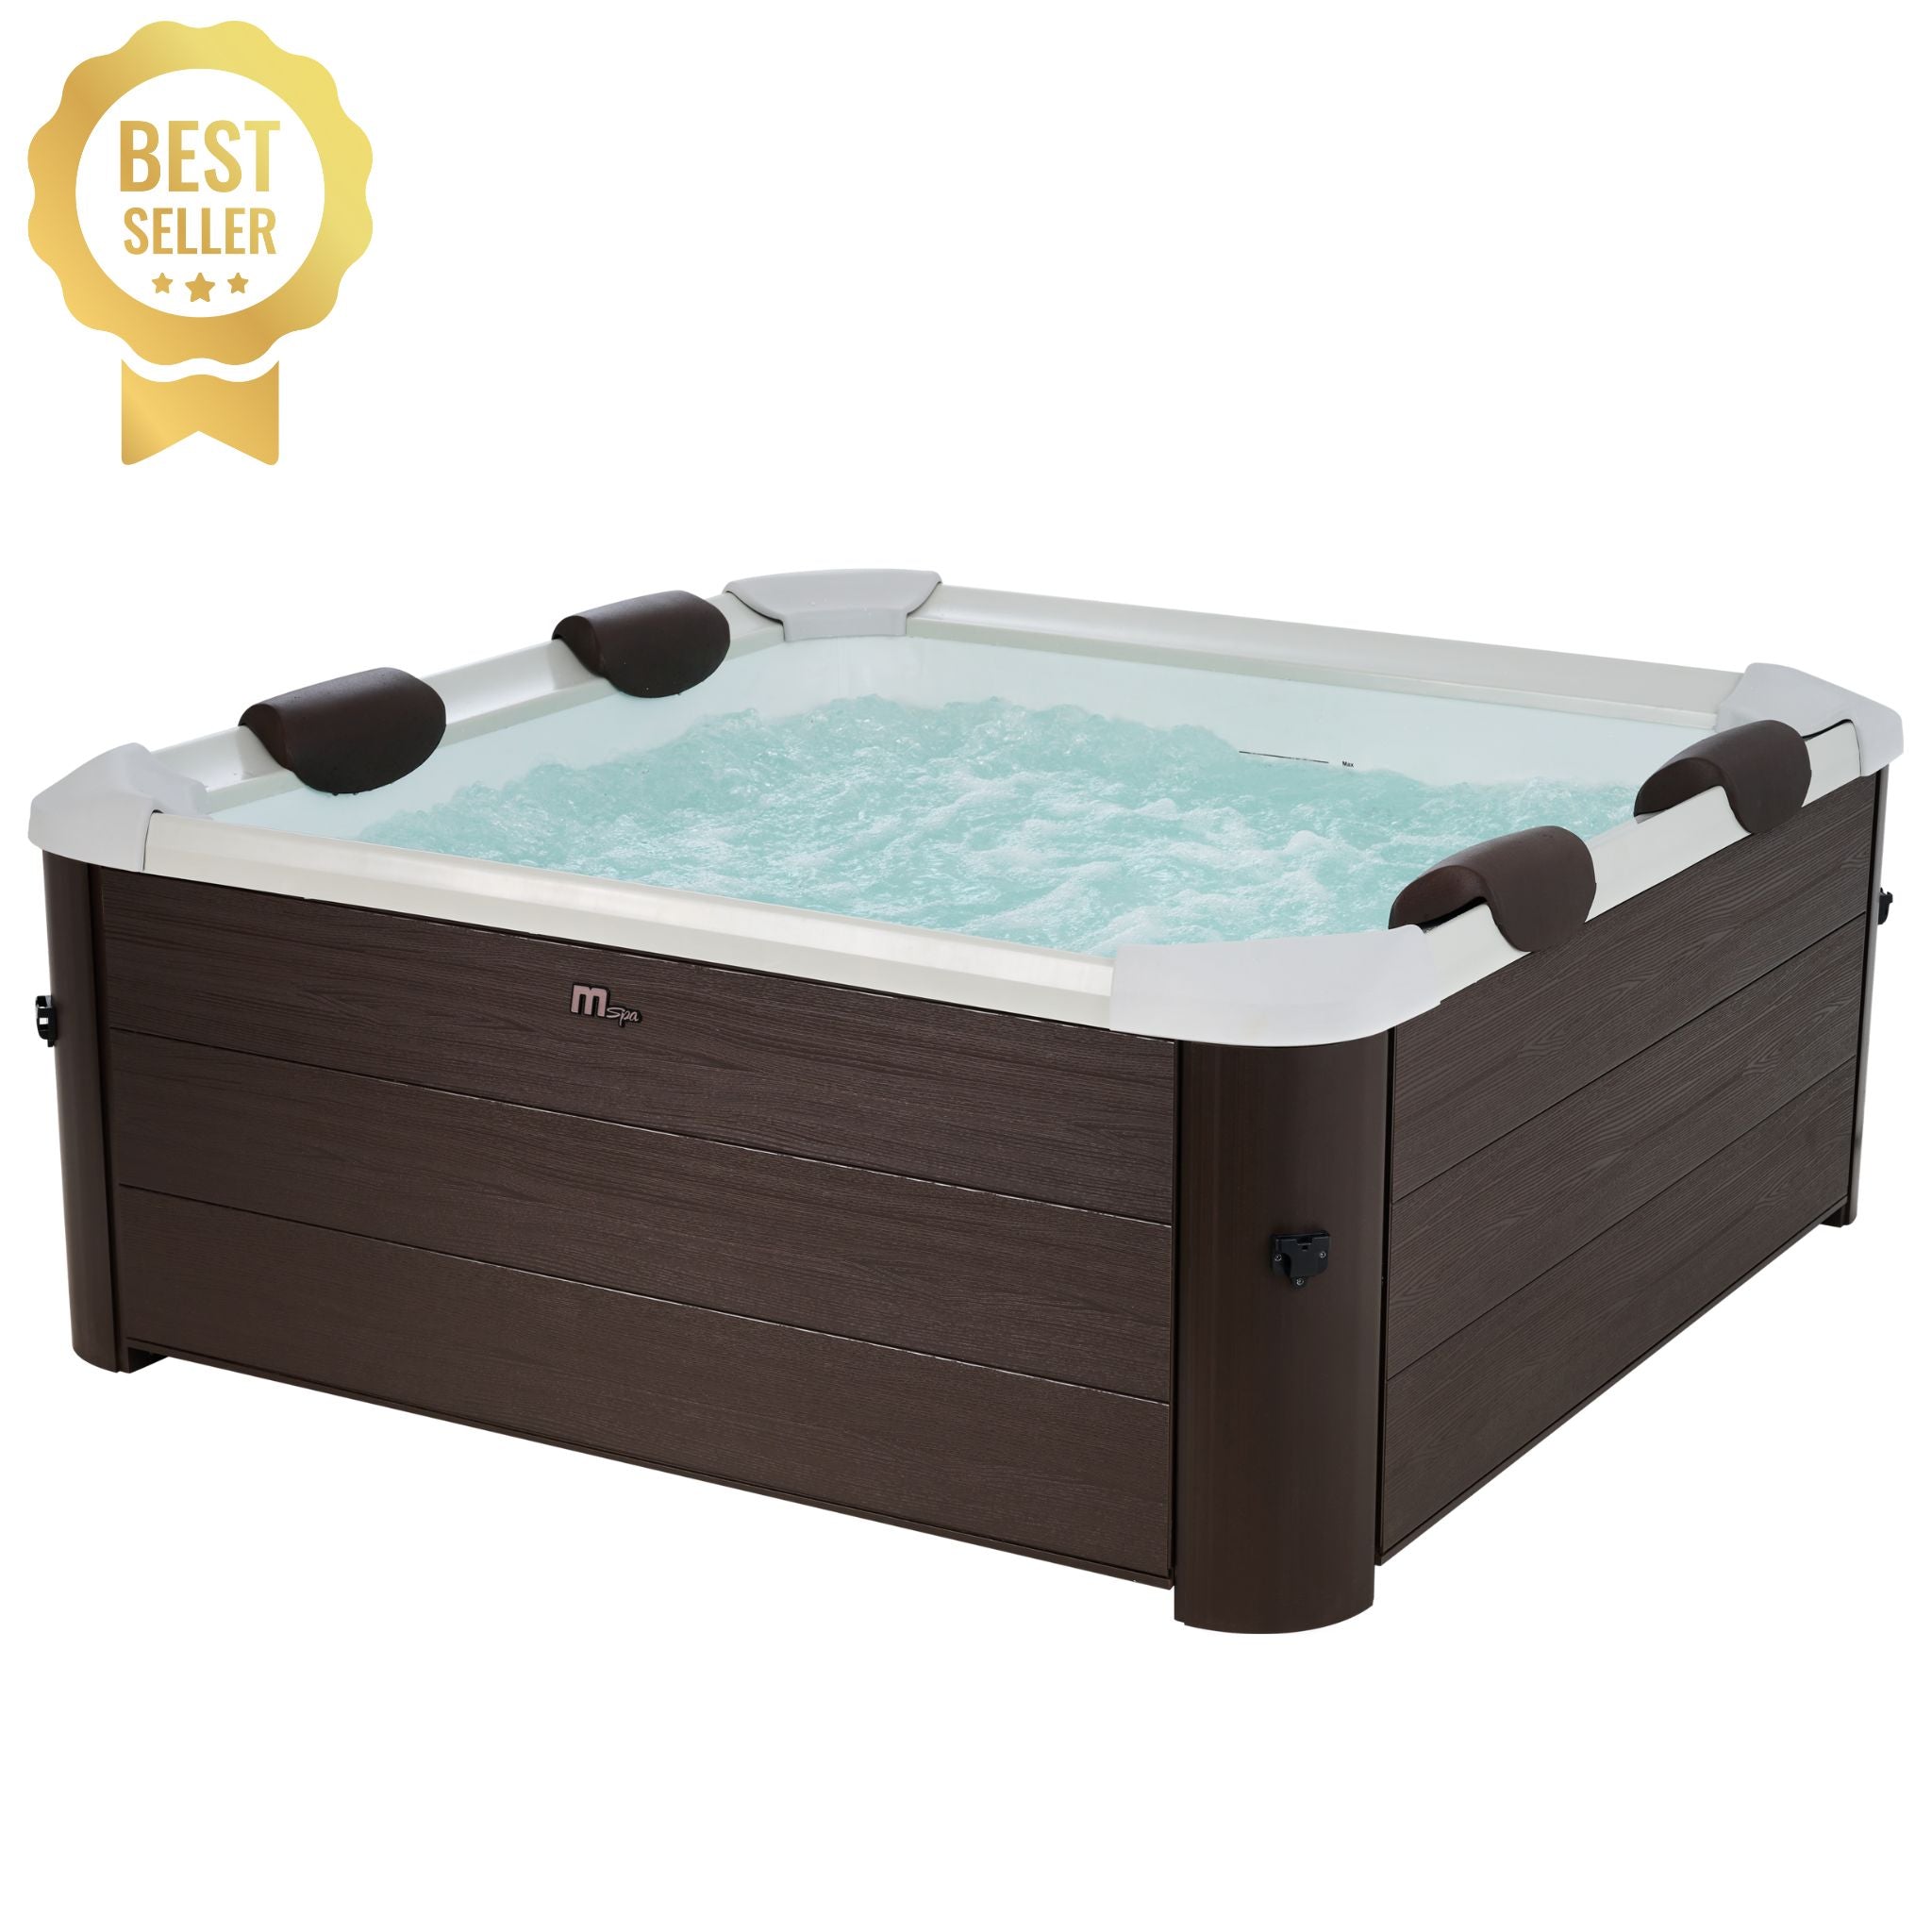 MSpa Frame Series Tribeca Luxury 2-6 Person Inflatable Hot Tub Spa W/ OLED Touch Screen, Anti-Icing System